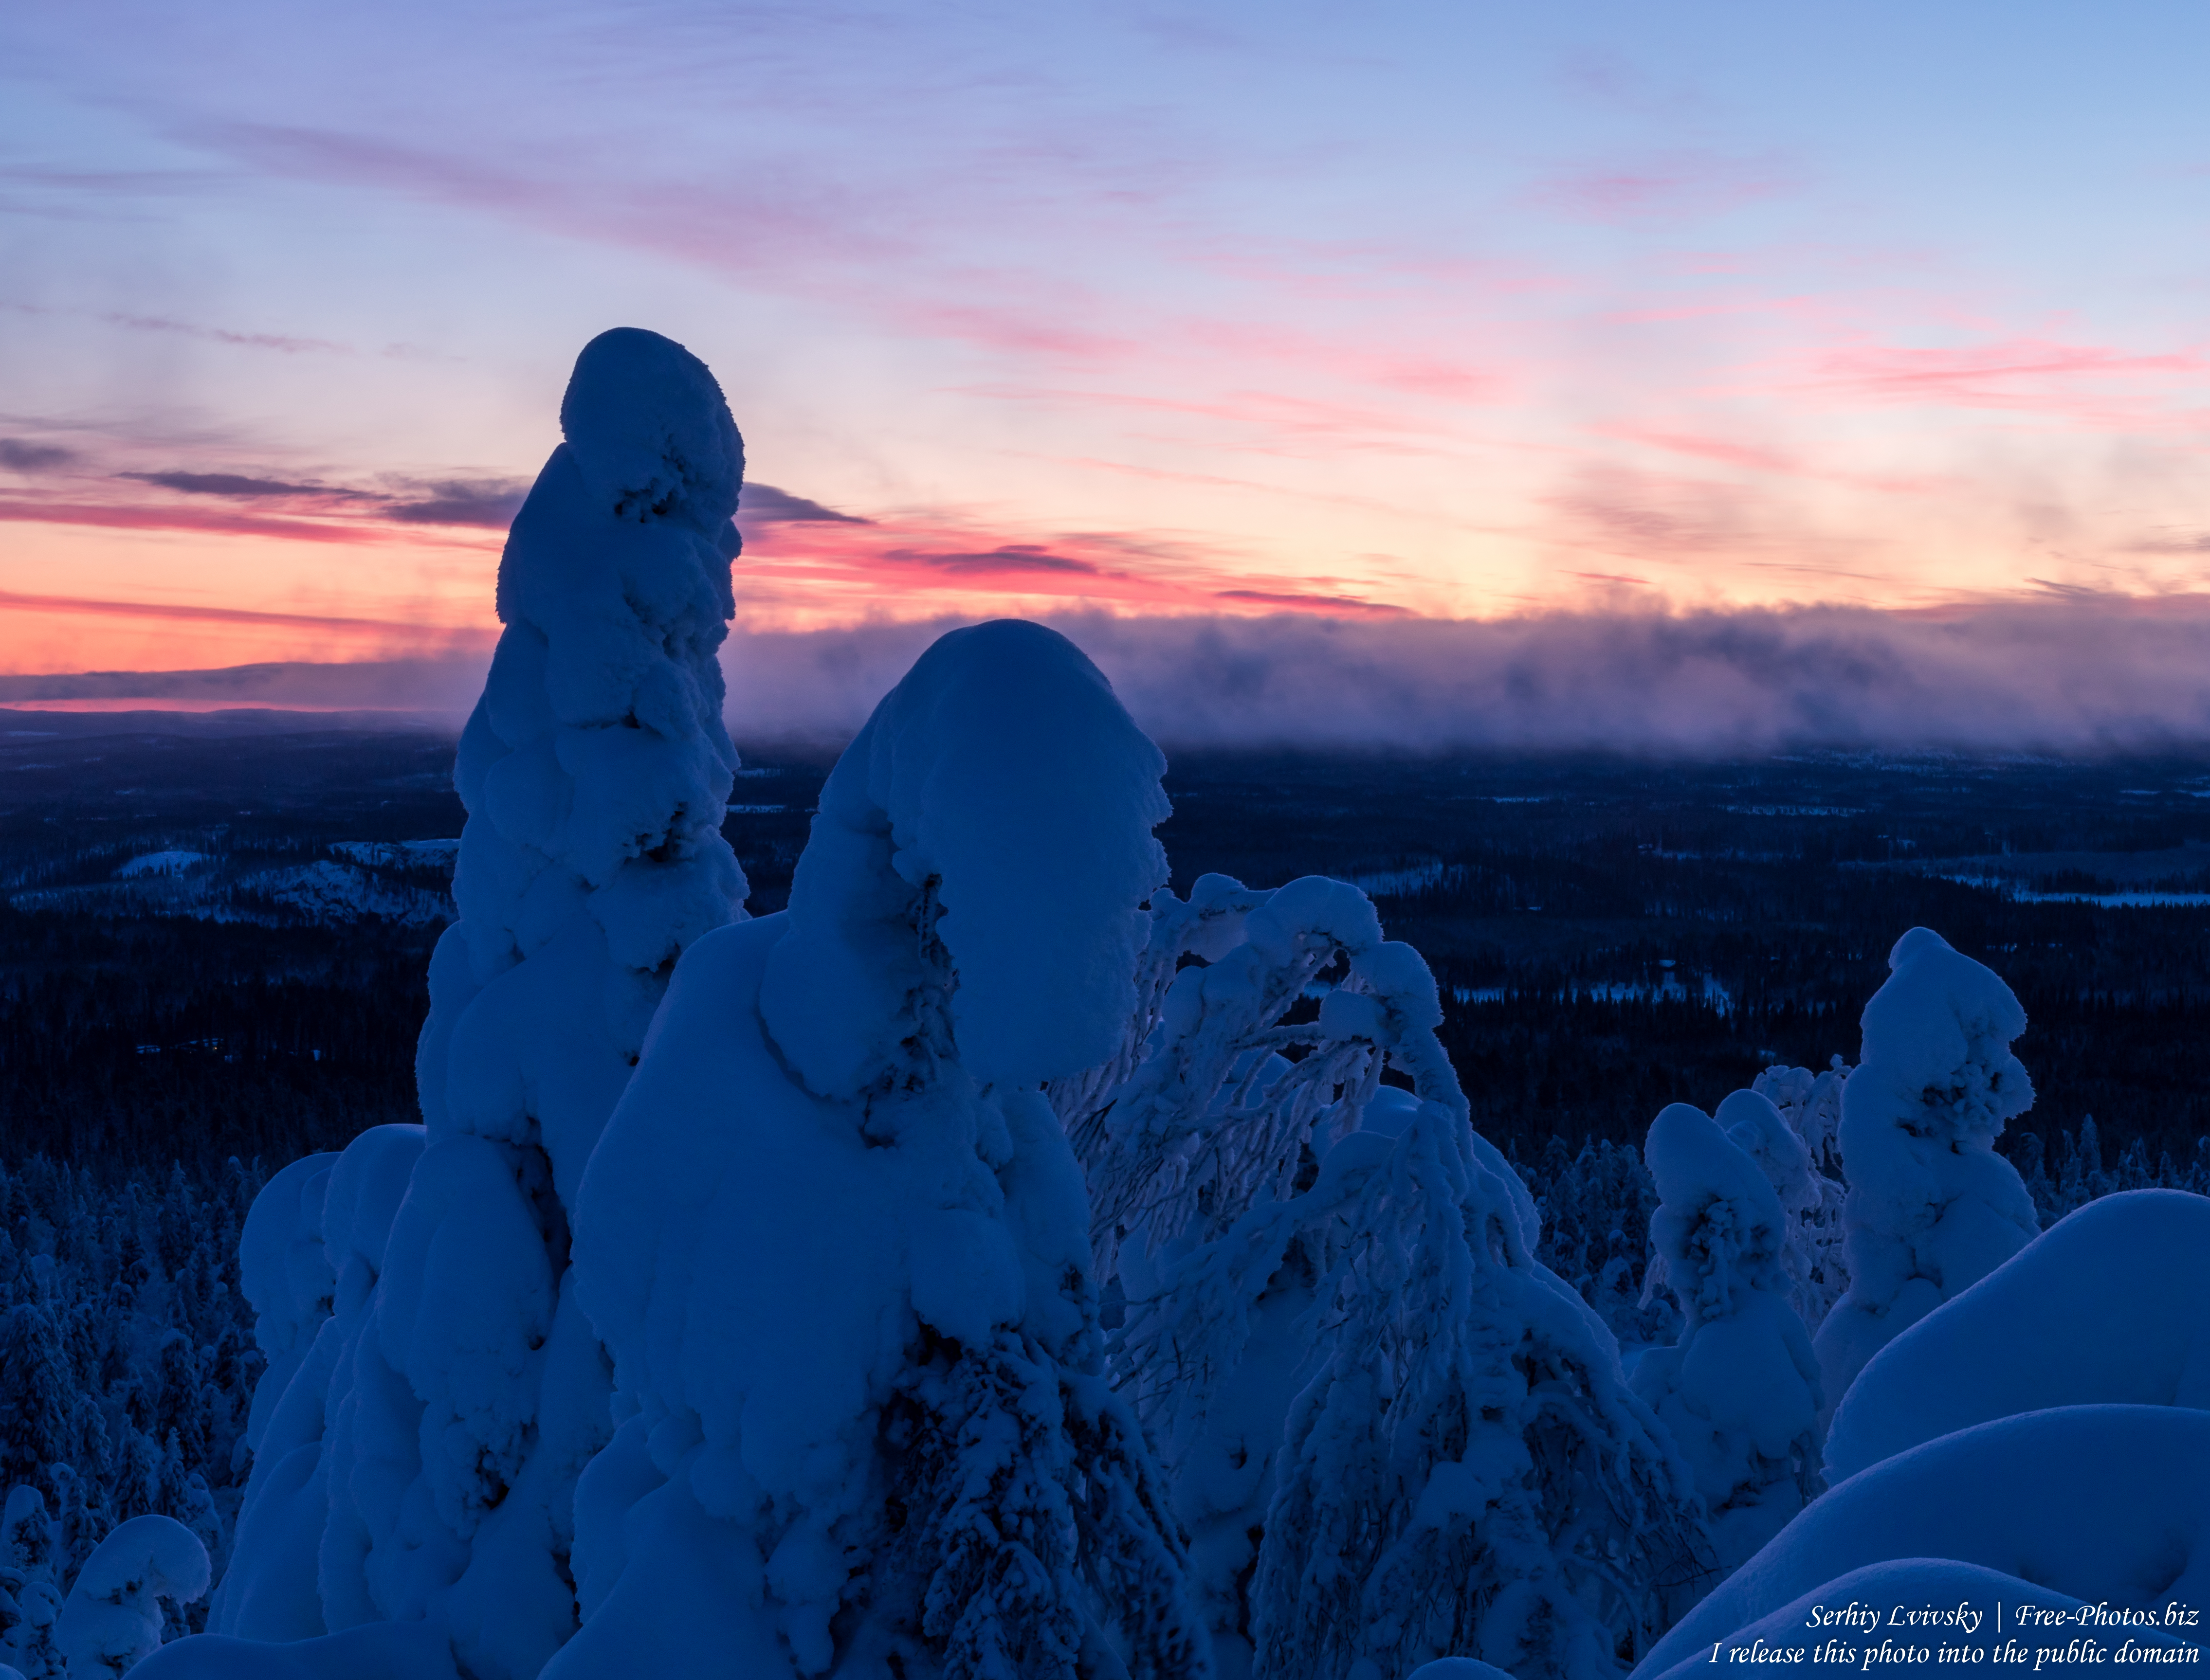 Valtavaara, Finland, photographed in January 2020 by Serhiy Lvivsky, picture 47